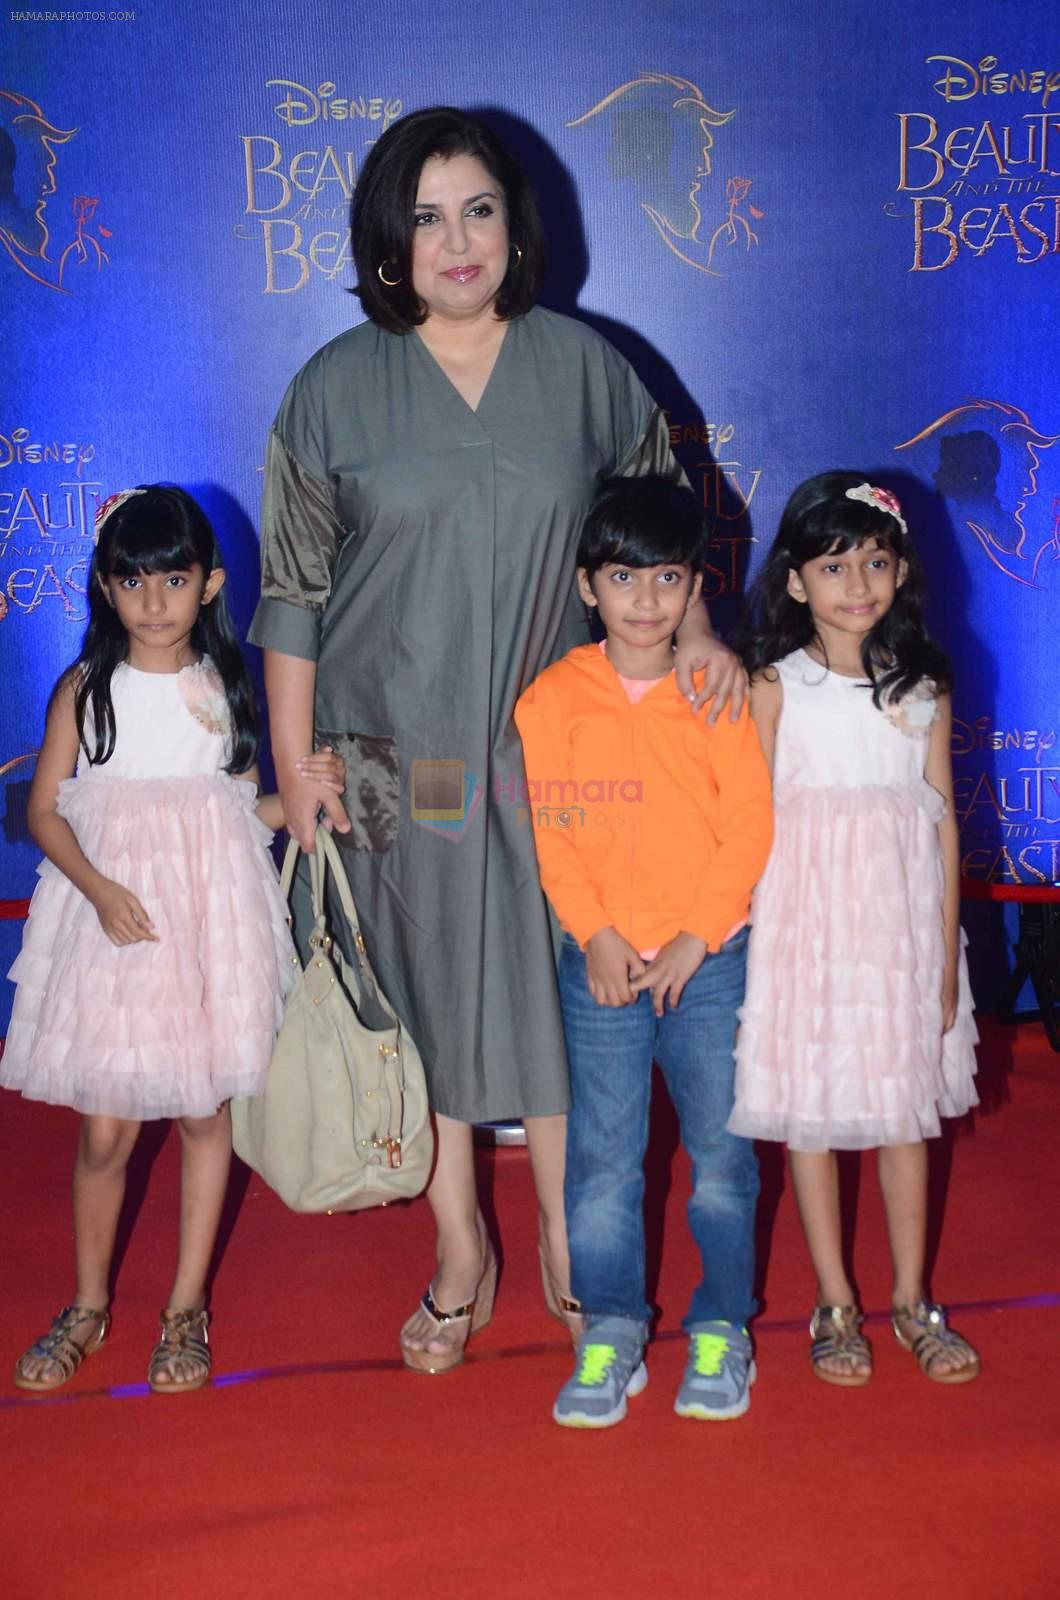 Farah Khan at Beauty and the Beast red carpet in Mumbai on 21st Oct 2015